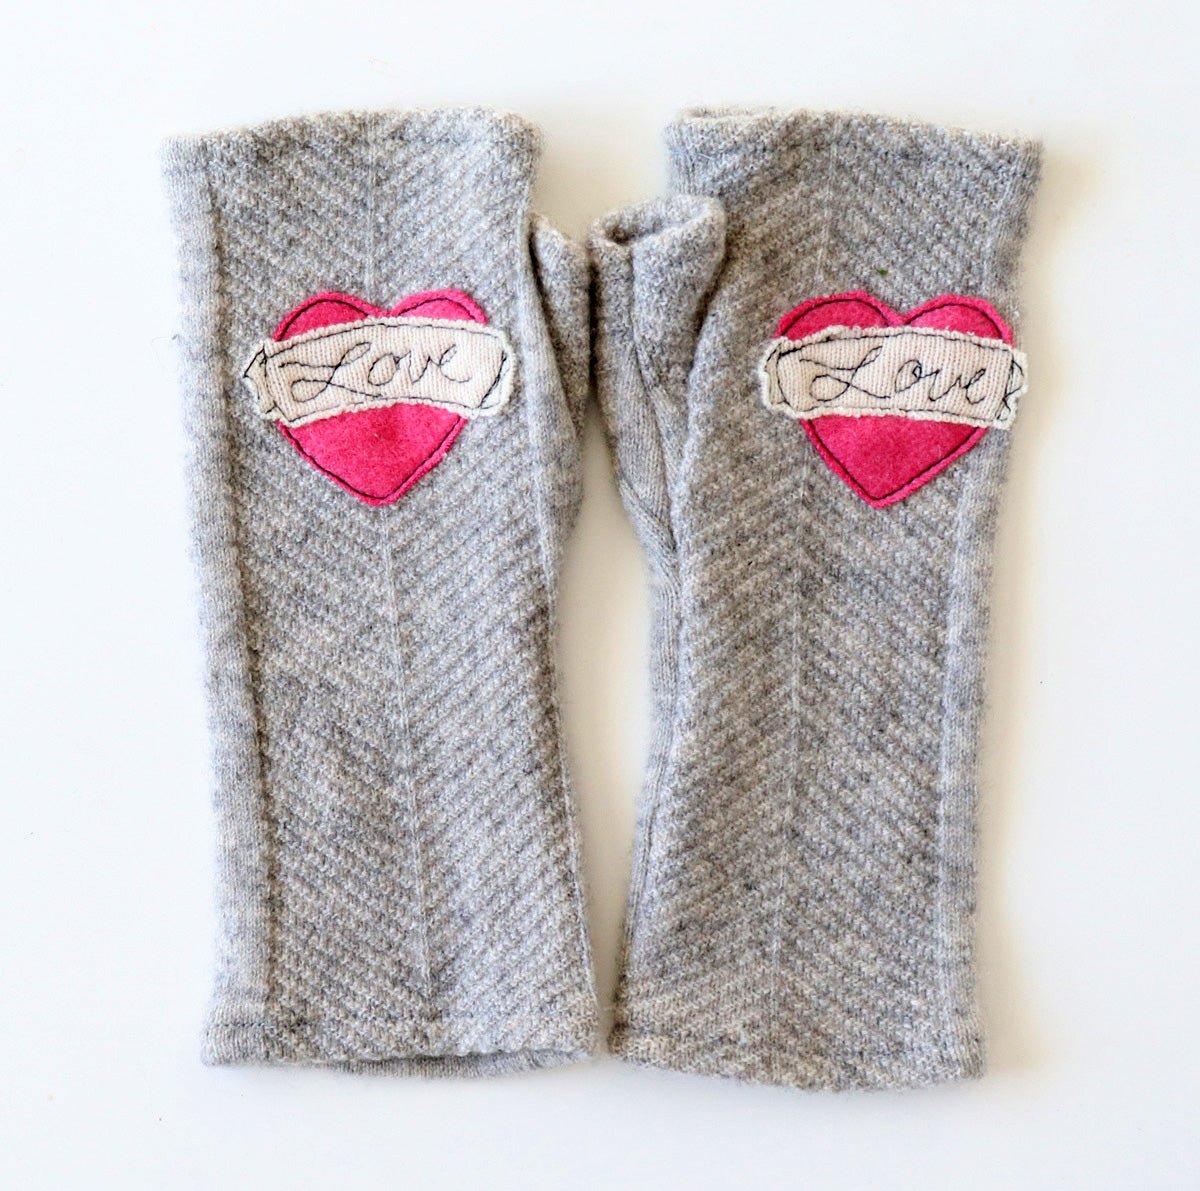 Pink Love on Grey Cashmere Fingerless Gloves - BESPOKE PROVISIONS INC